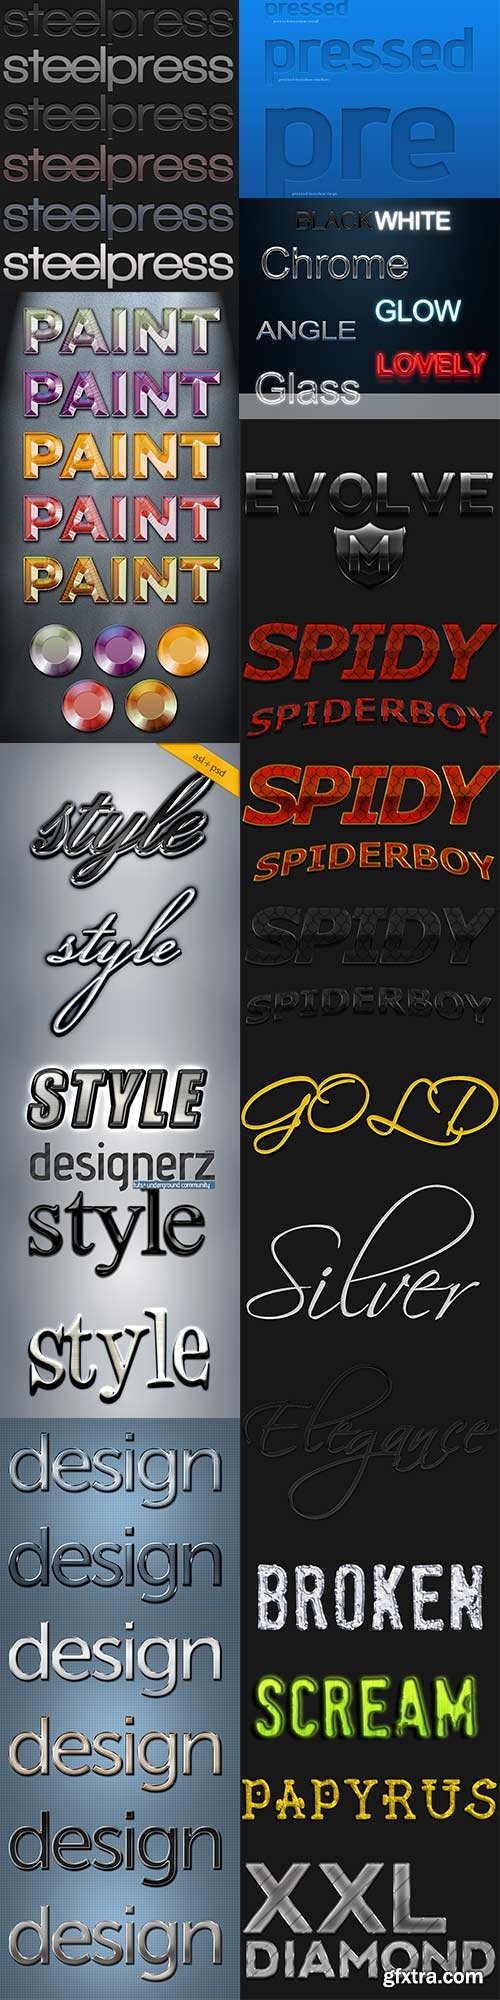 Different styles for photoshop